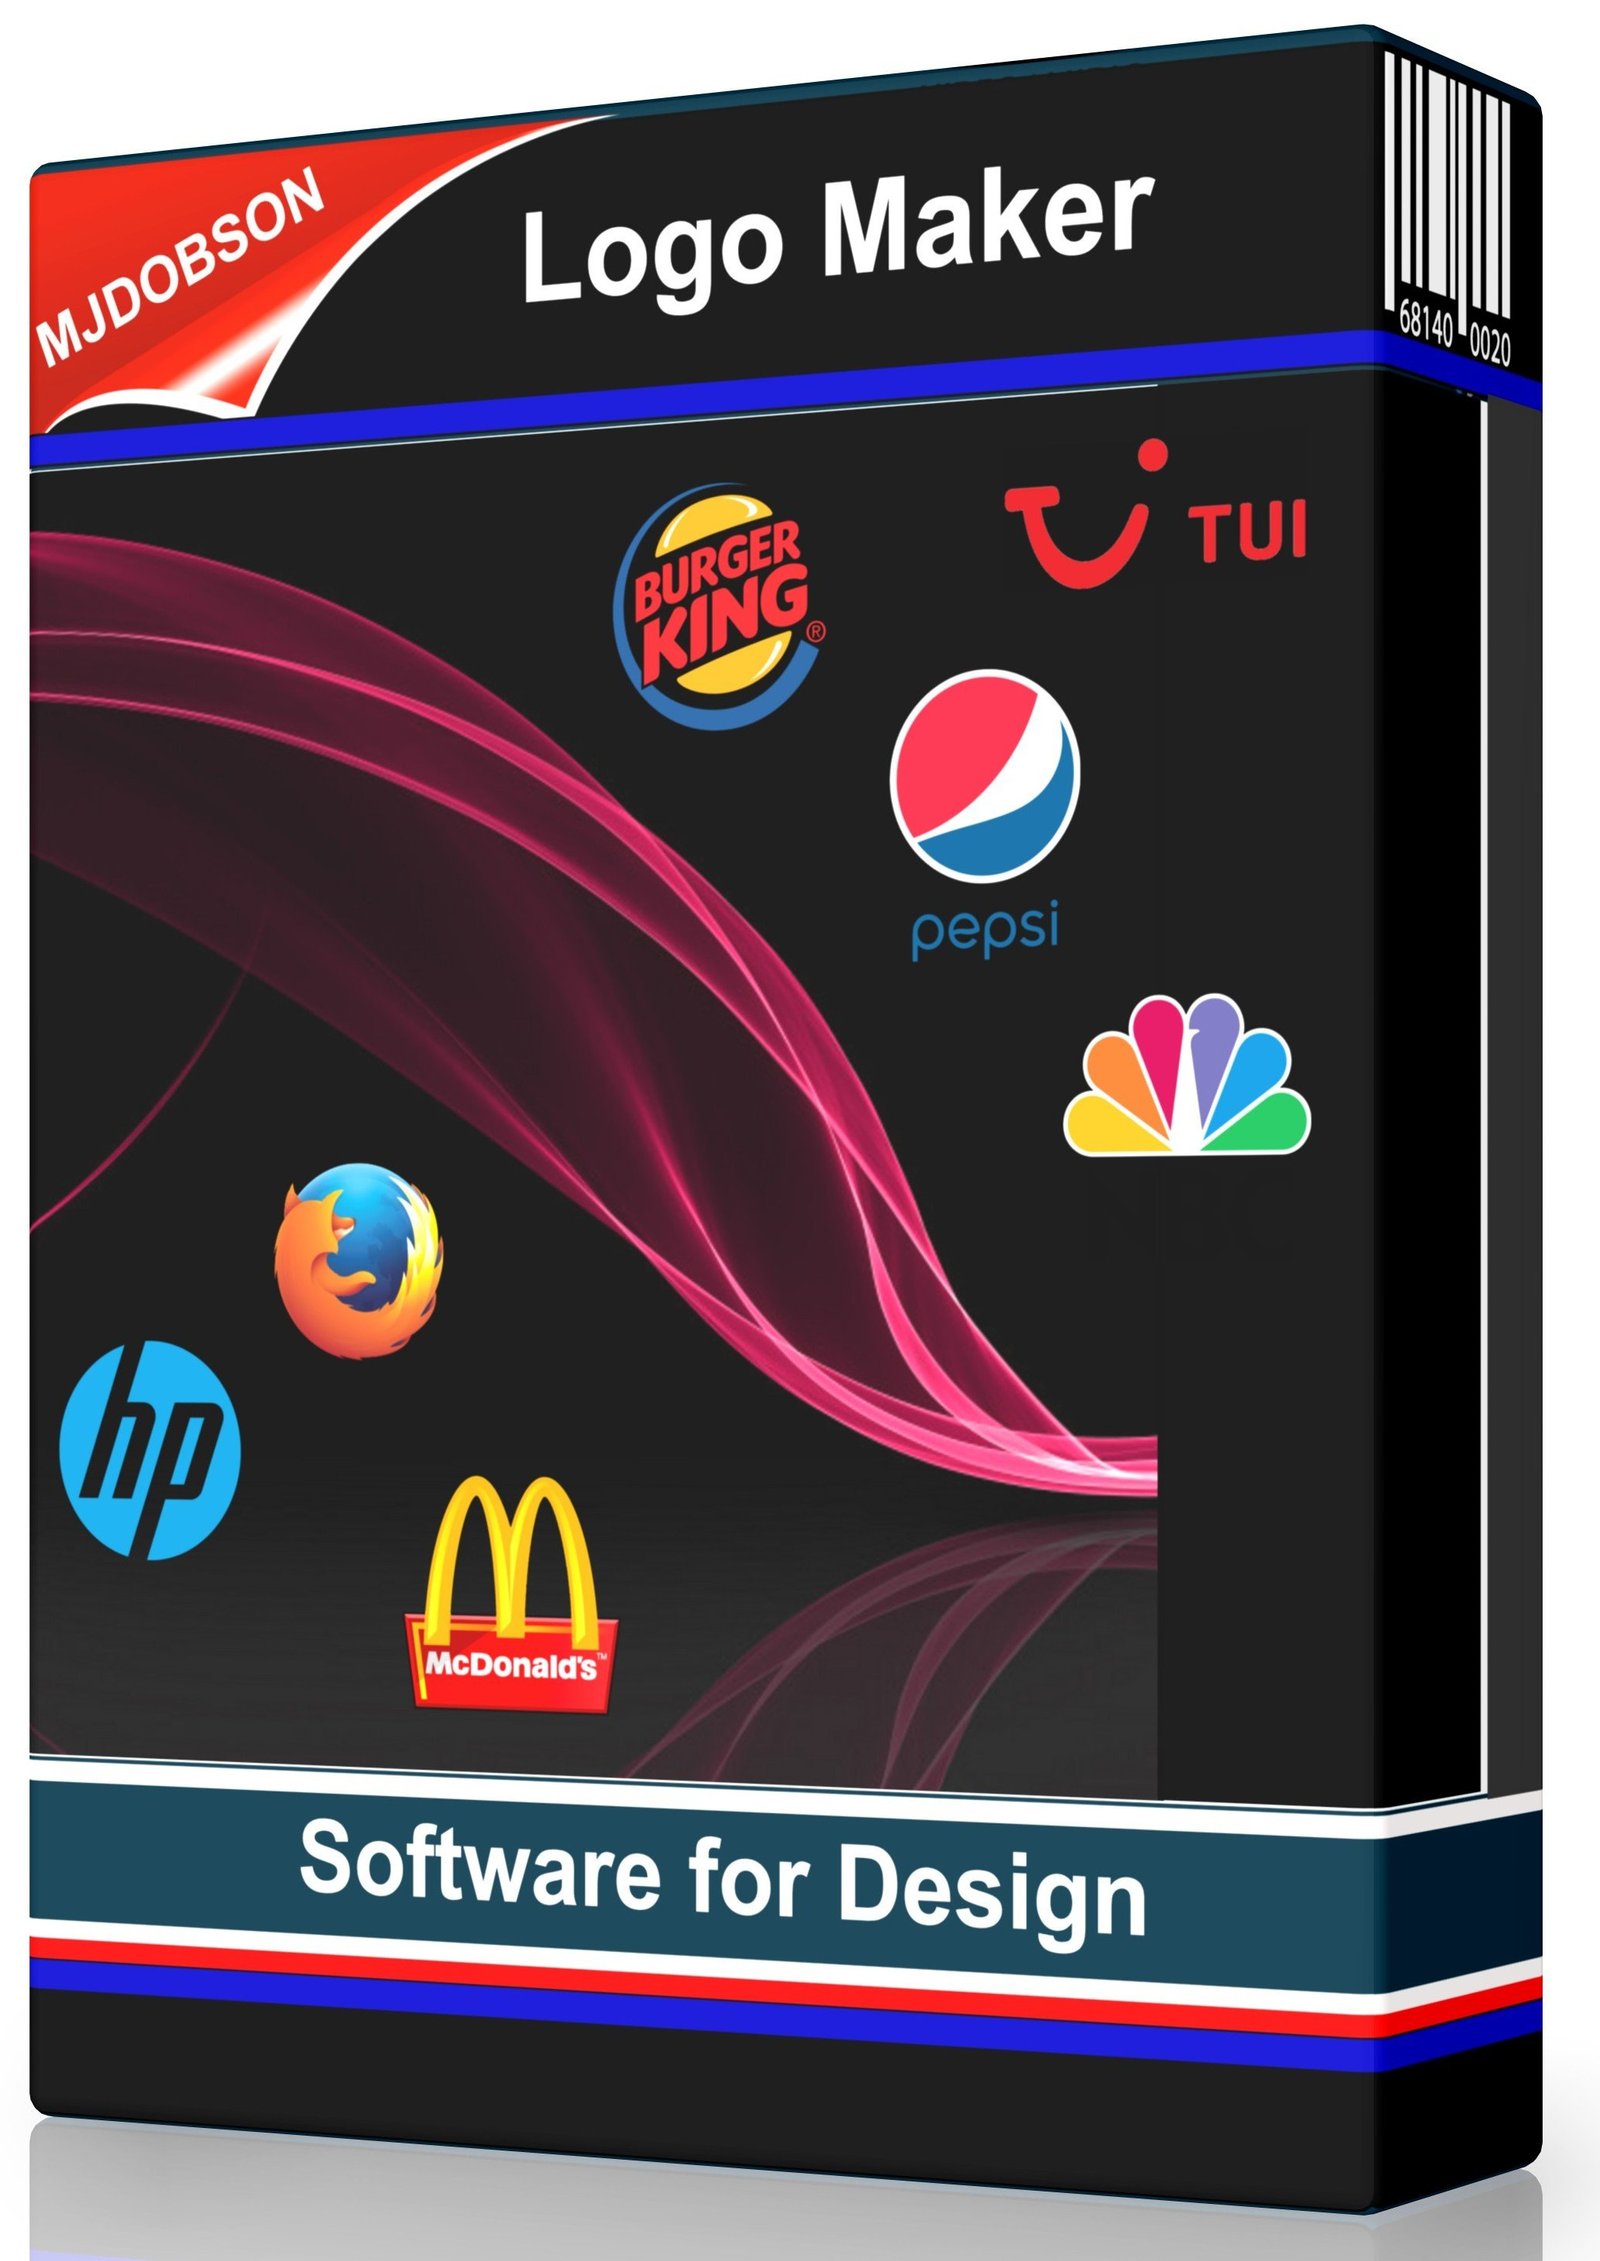 logo creator software free download for windows 10